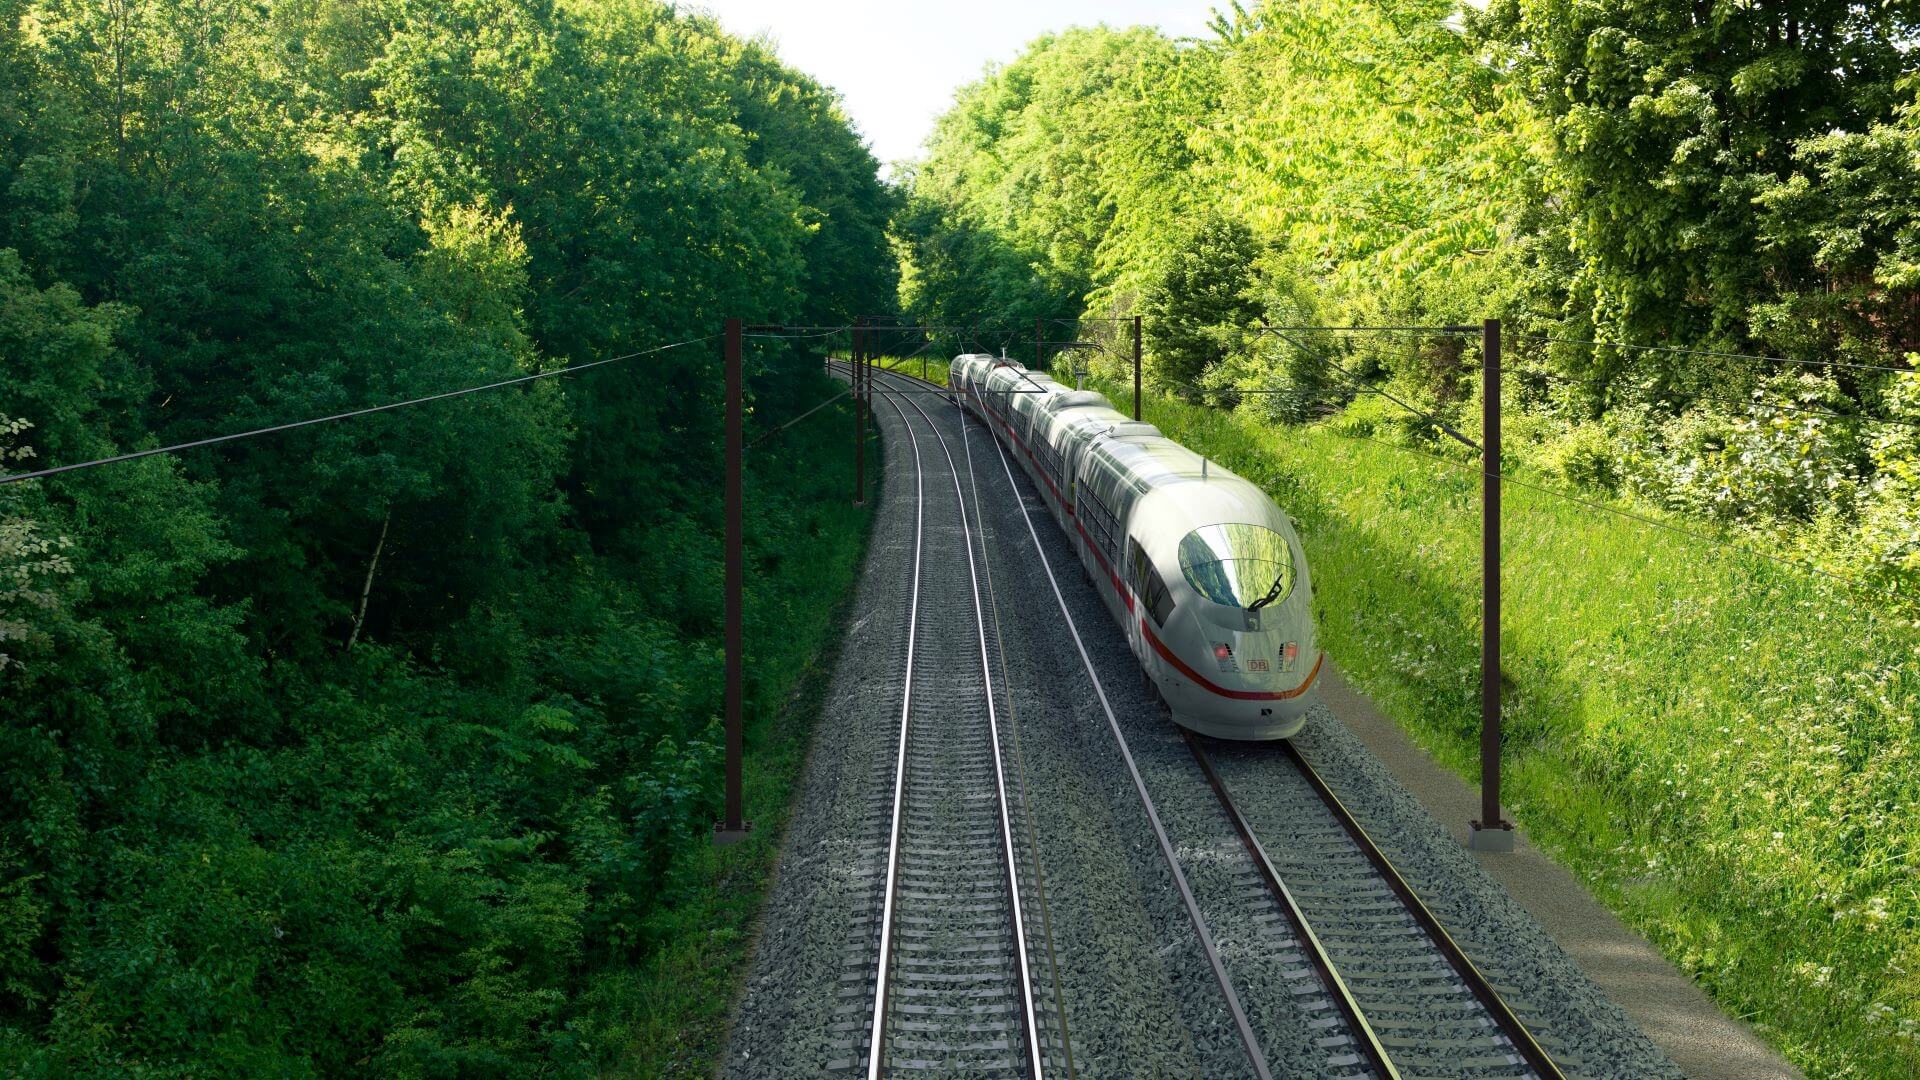 Sleek silver coloured train on tracks with green trees either side